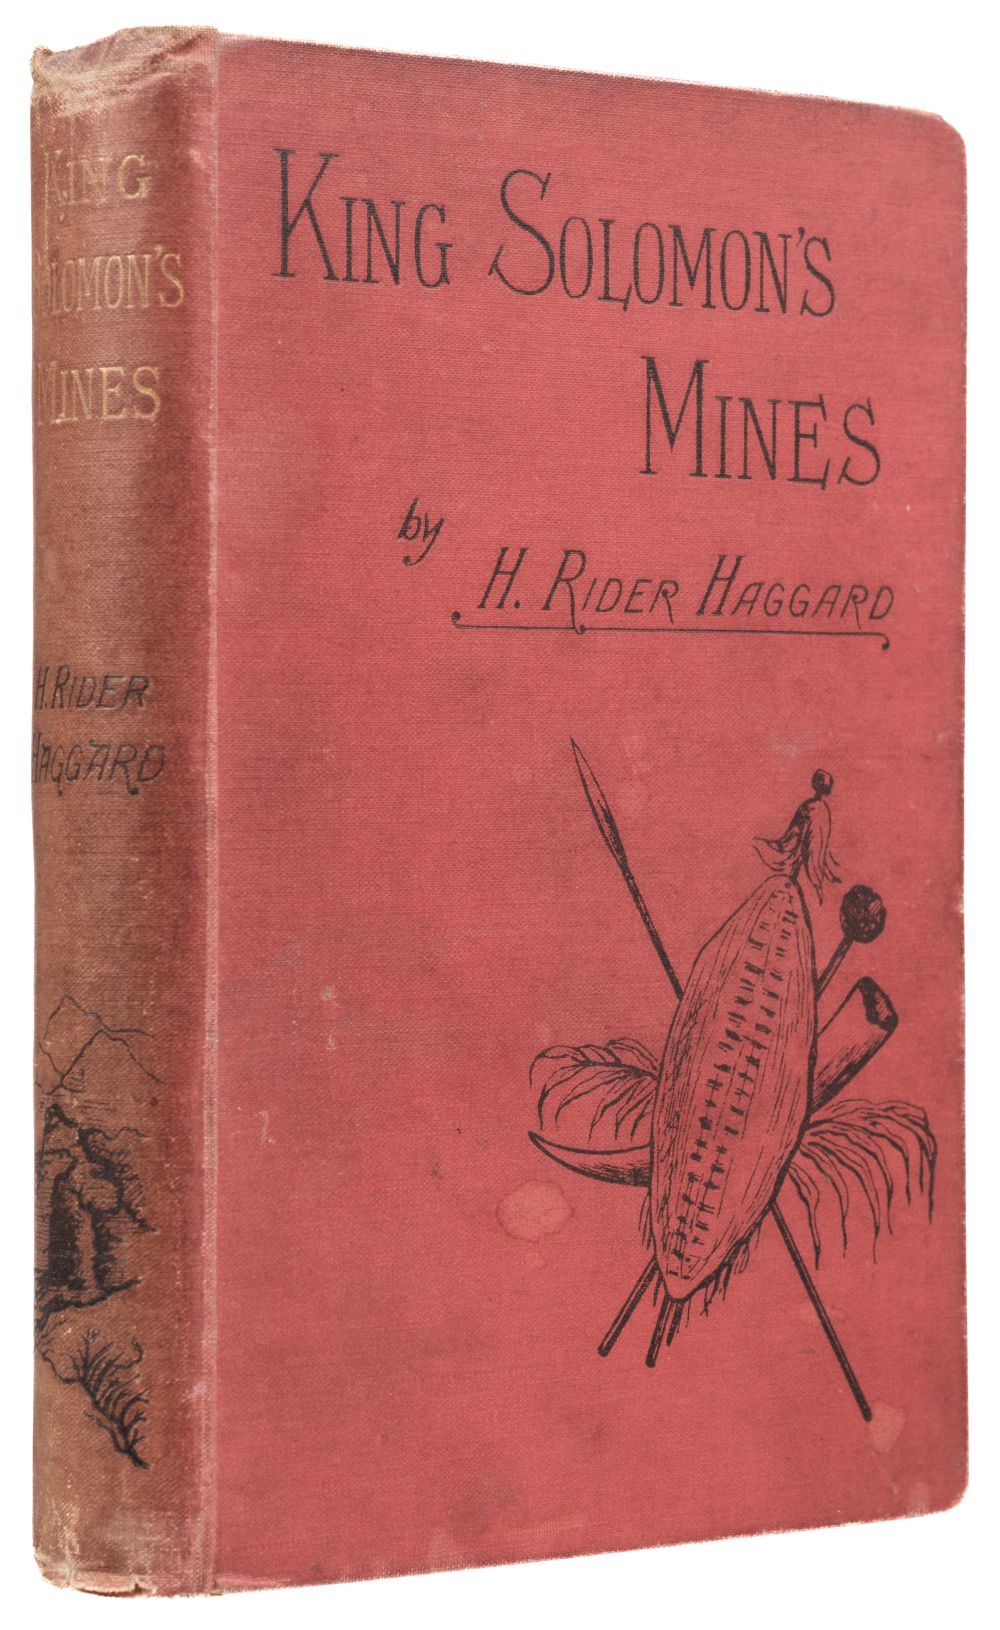 Haggard (H. Rider). King Solomon's Mines, 1st edition, 2nd issue, 1885